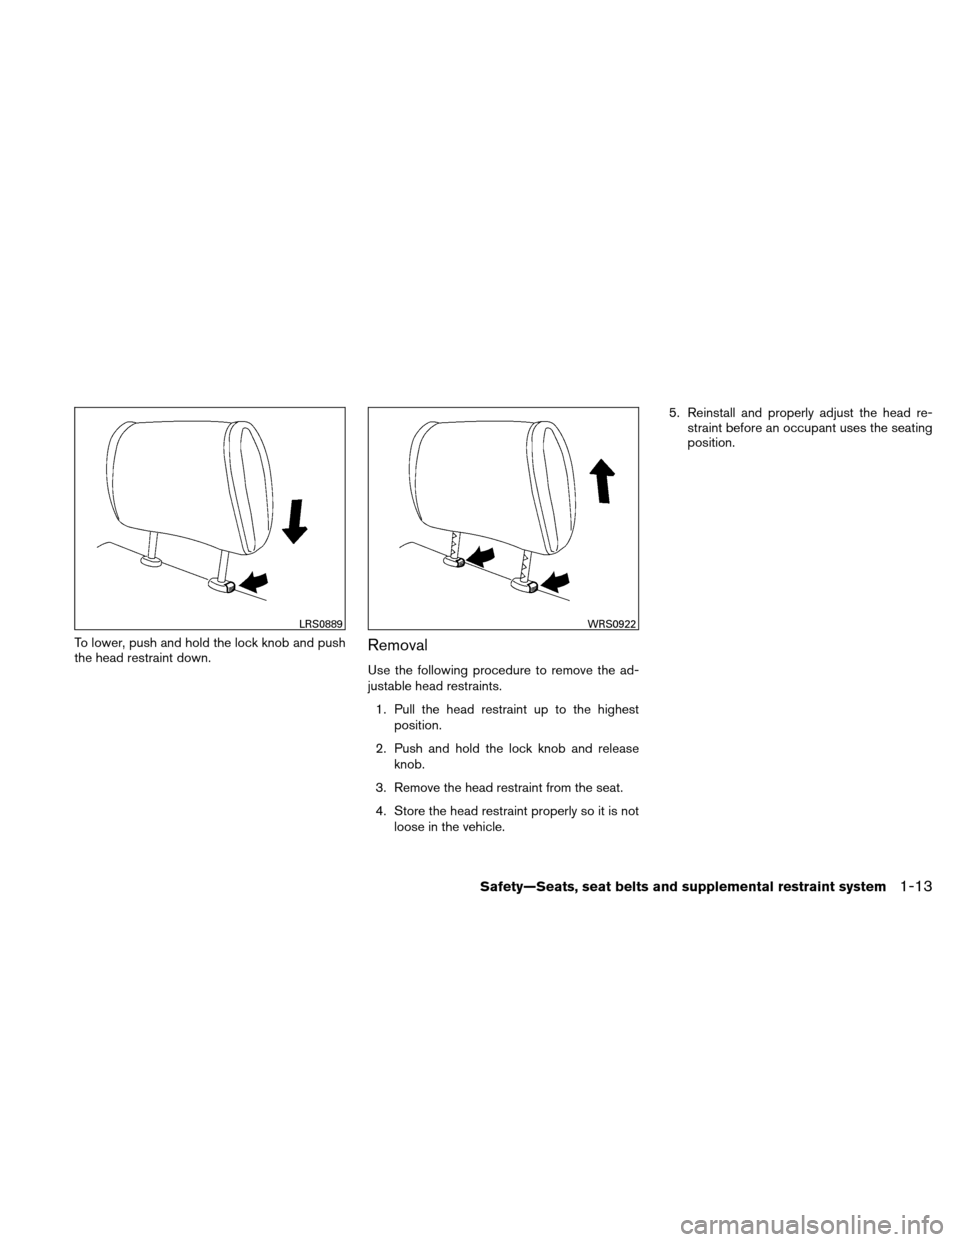 NISSAN ALTIMA COUPE 2010 D32 / 4.G Owners Manual To lower, push and hold the lock knob and push
the head restraint down.Removal
Use the following procedure to remove the ad-
justable head restraints.1. Pull the head restraint up to the highest posit